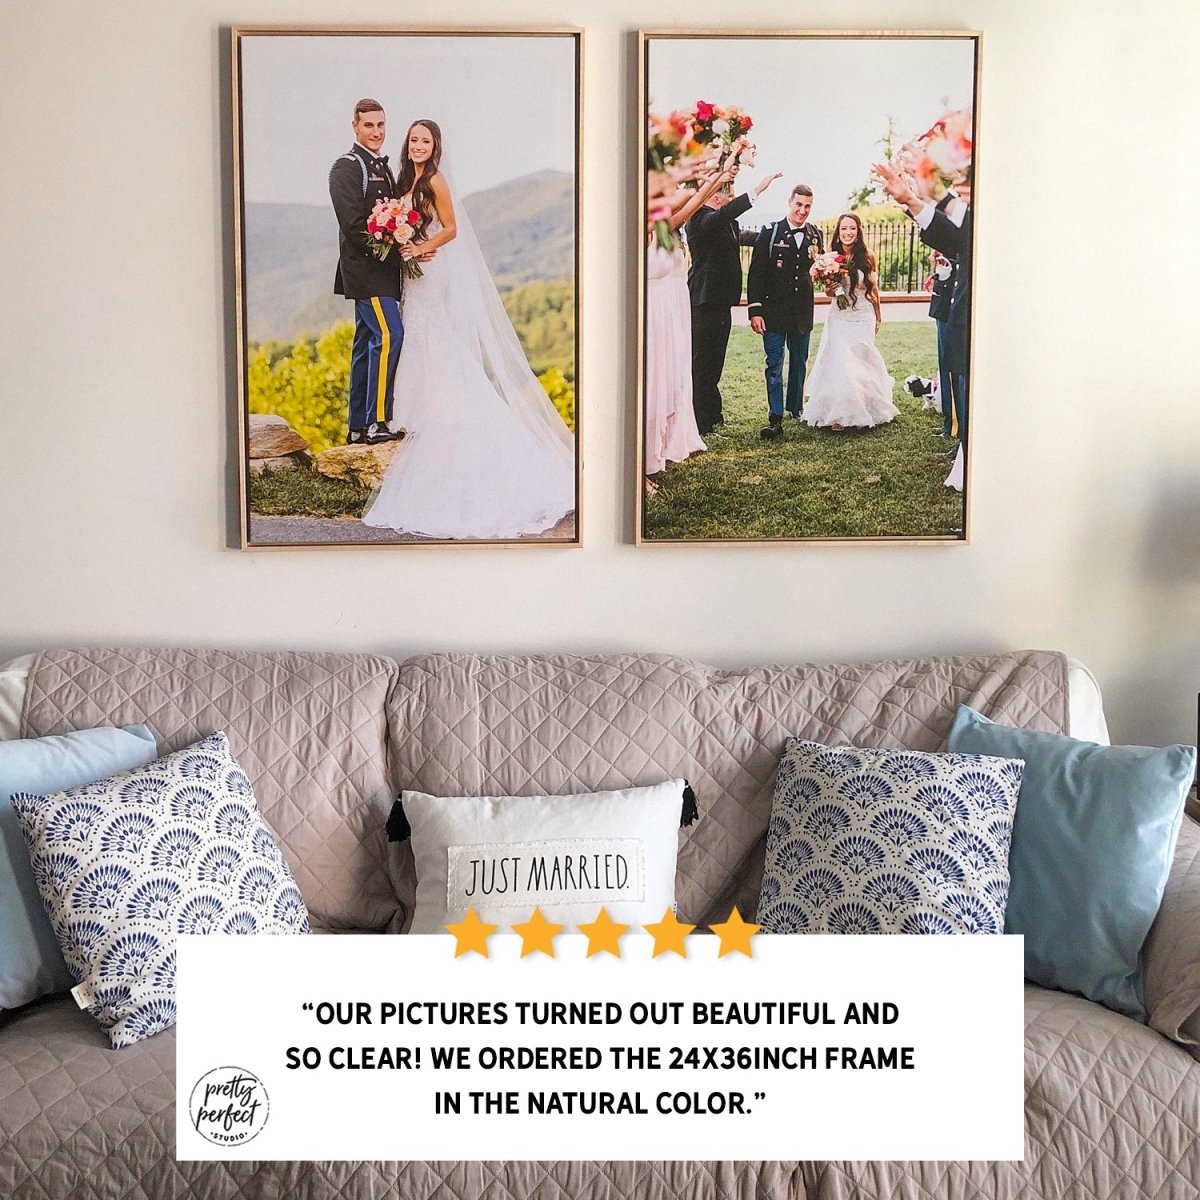 Customer product review for custom photo canvas wall art by Pretty Perfect Studio